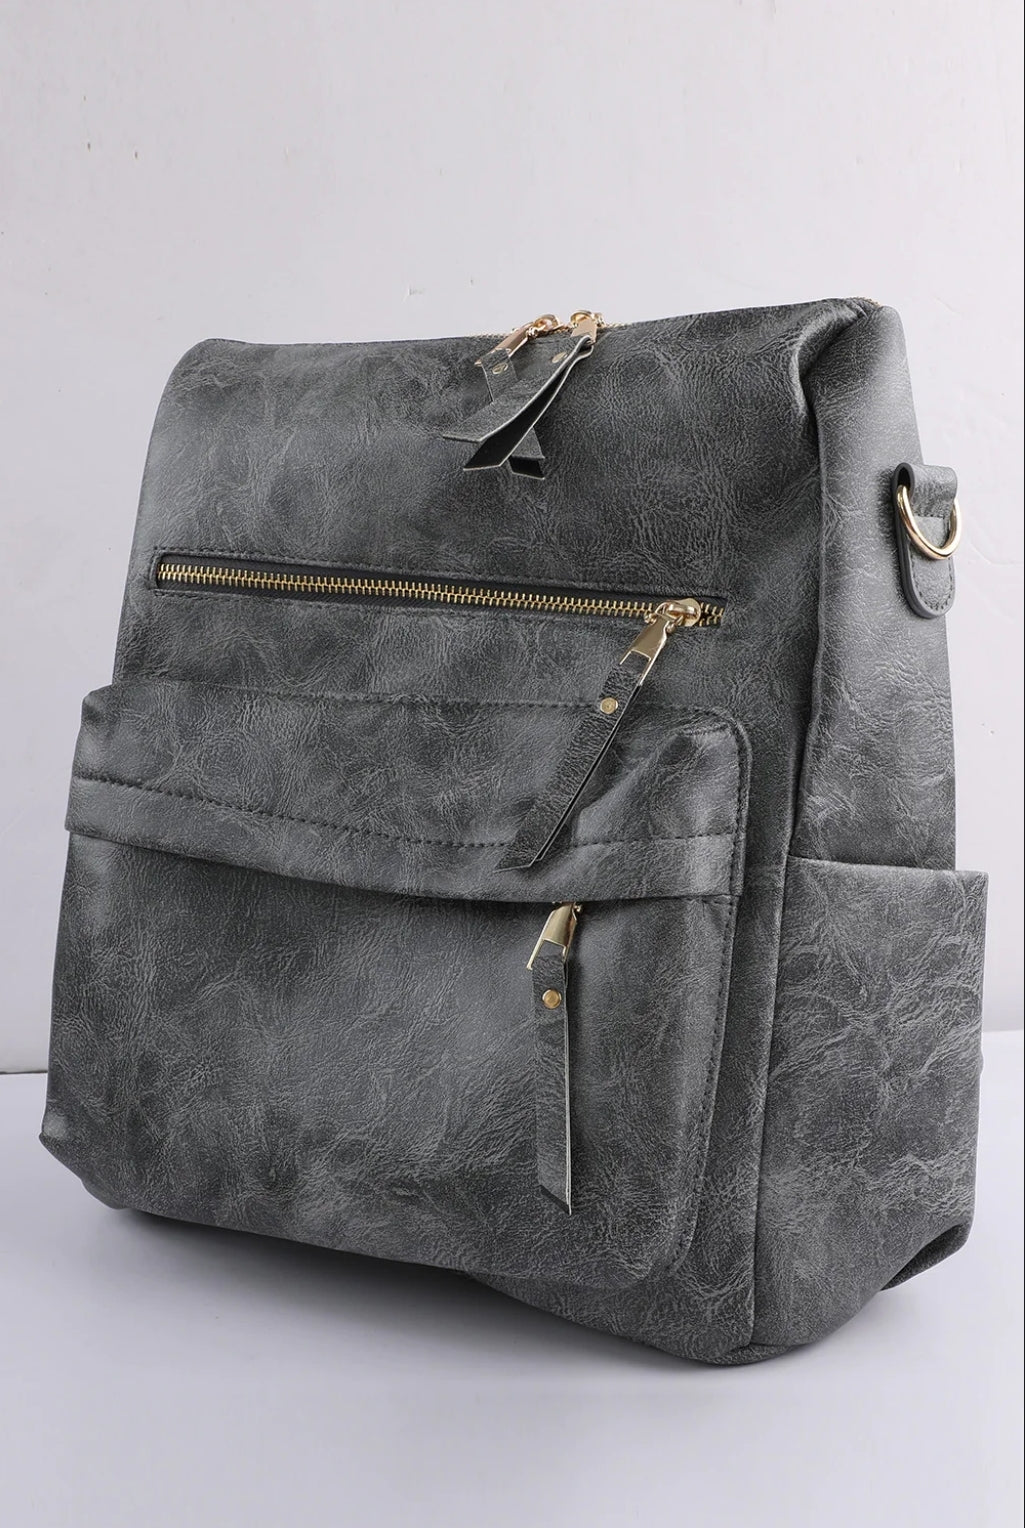 Gray Casual Versatile PU Leather Backpack